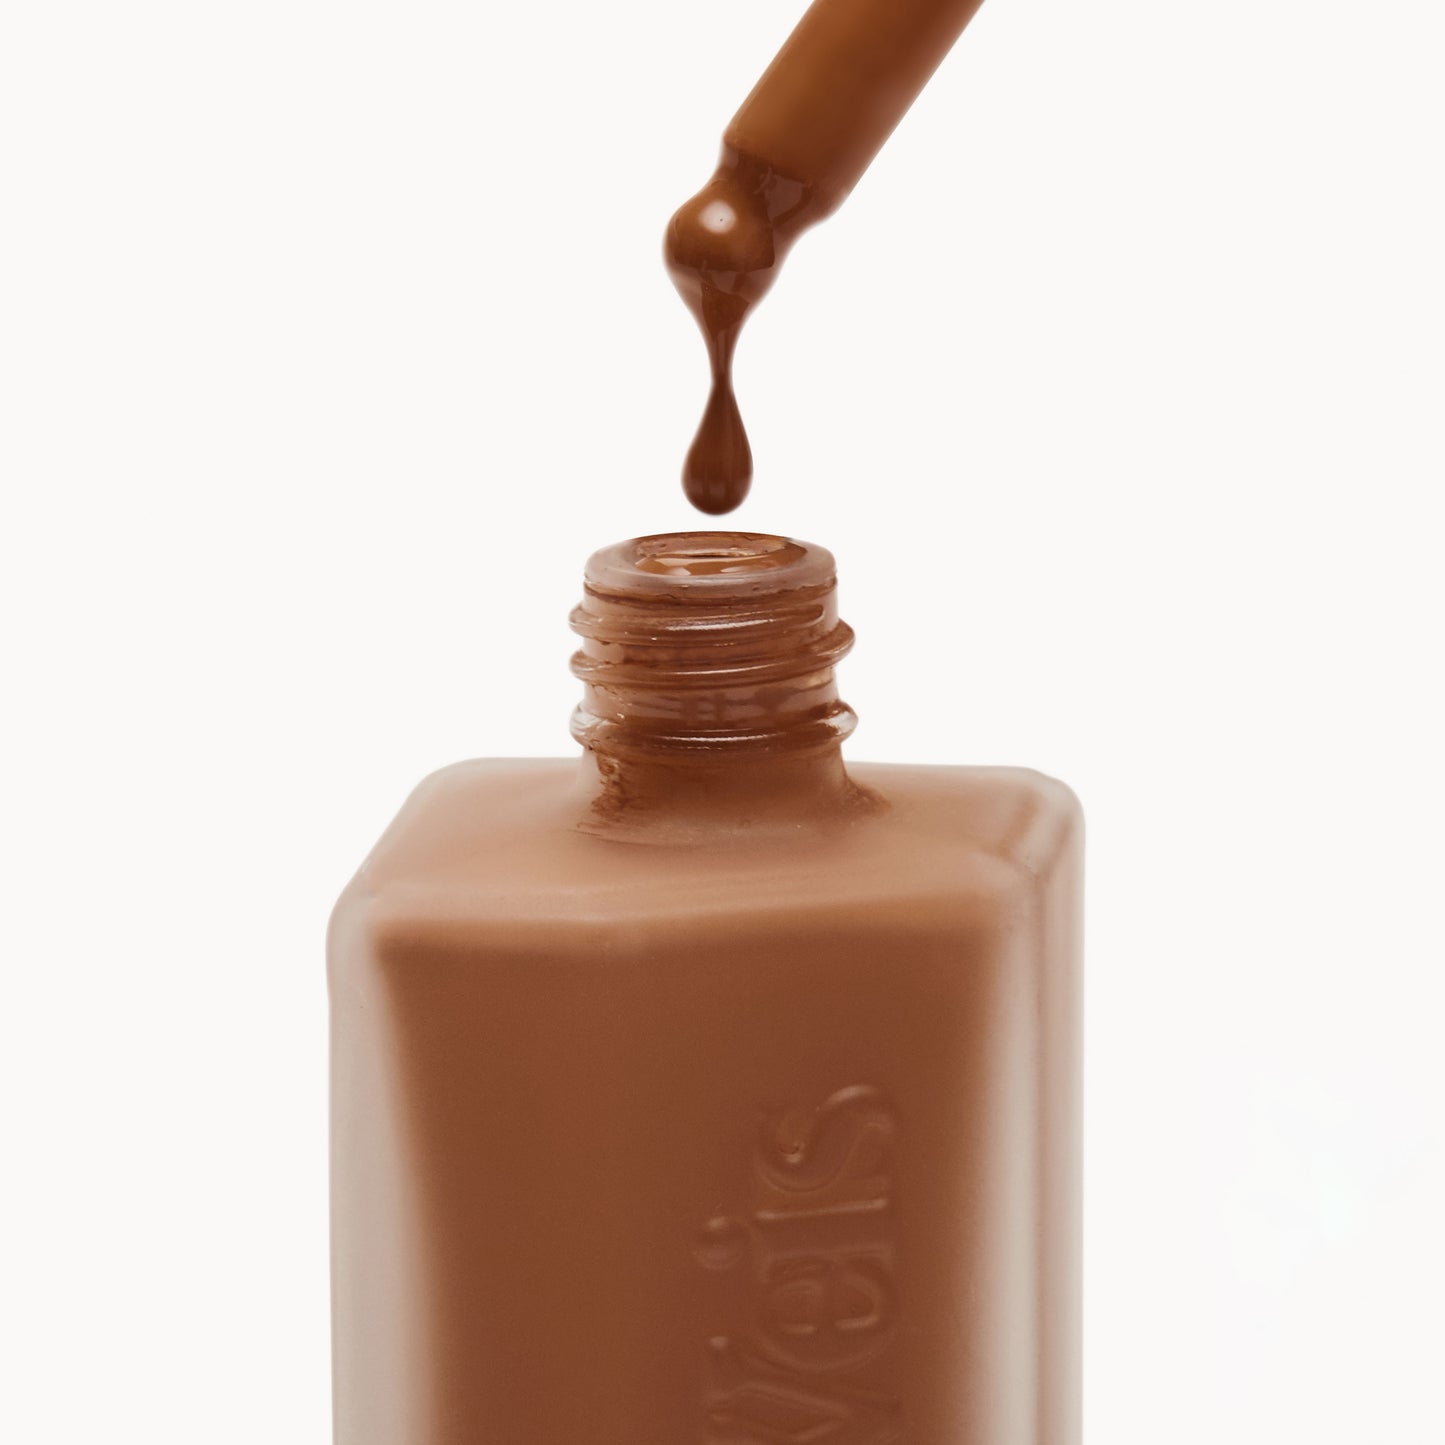 Invisible Touch Liquid Foundation--D340/Perfection